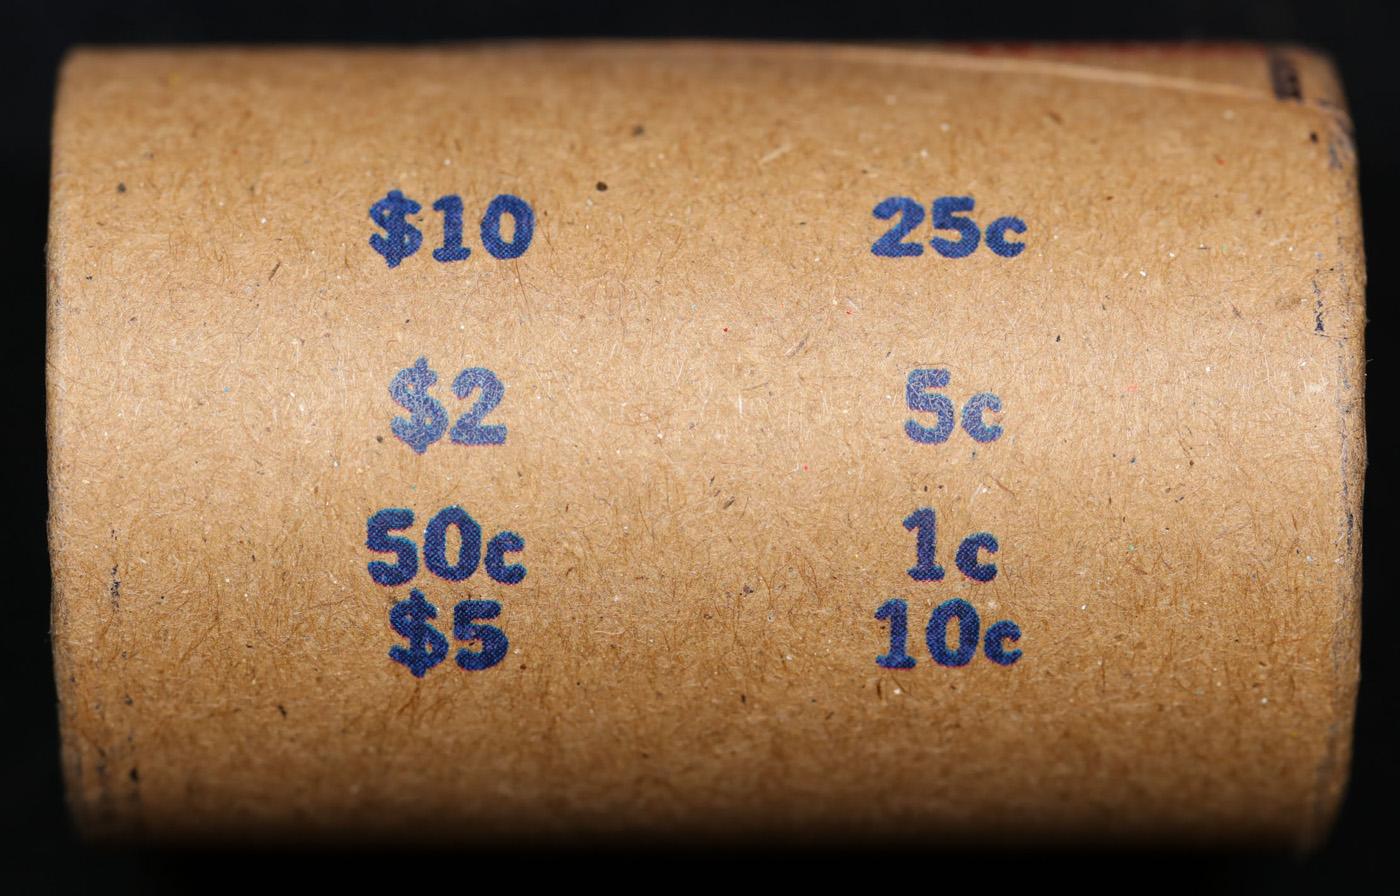 *Uncovered Hoard* - Covered End Roll - Marked "Unc Morgan Limited" - Weight shows x20 Coins (FC)